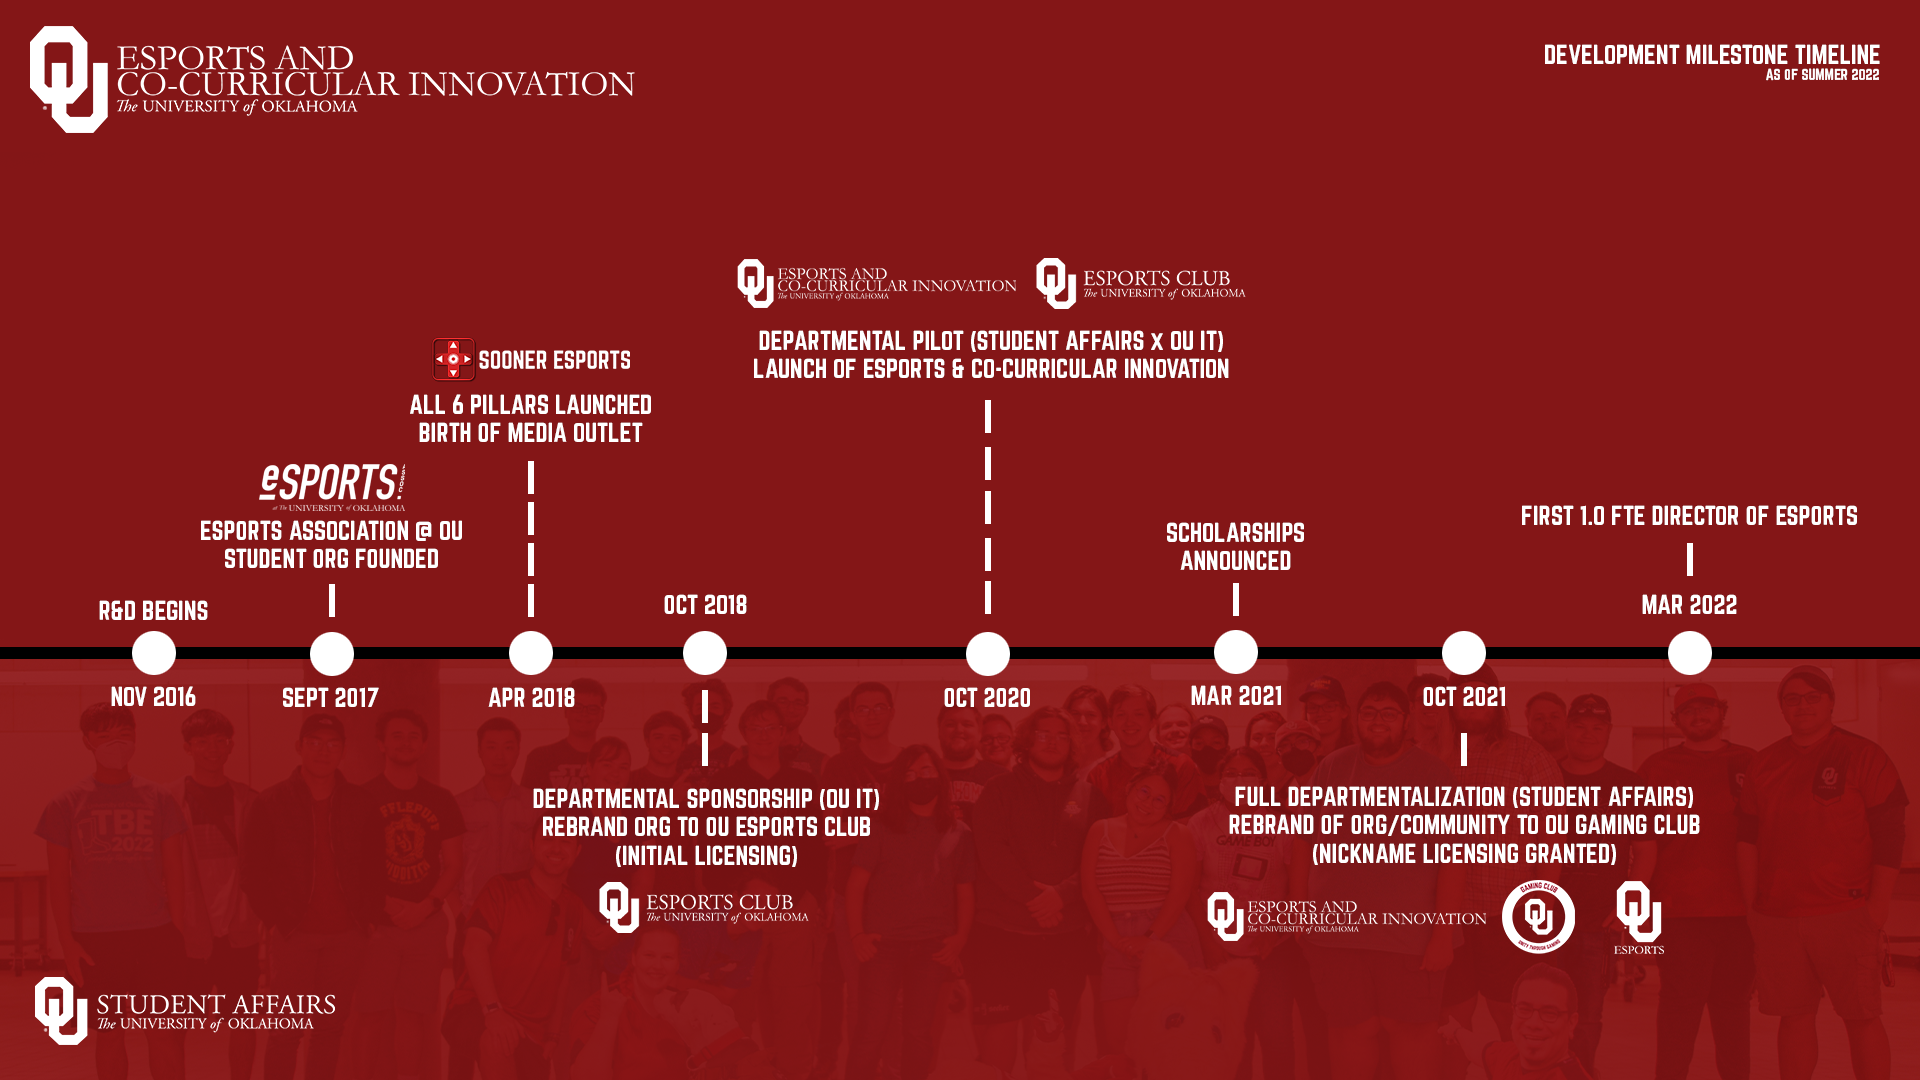 Timeline Graphic of Development from 2016 to Summer 2022